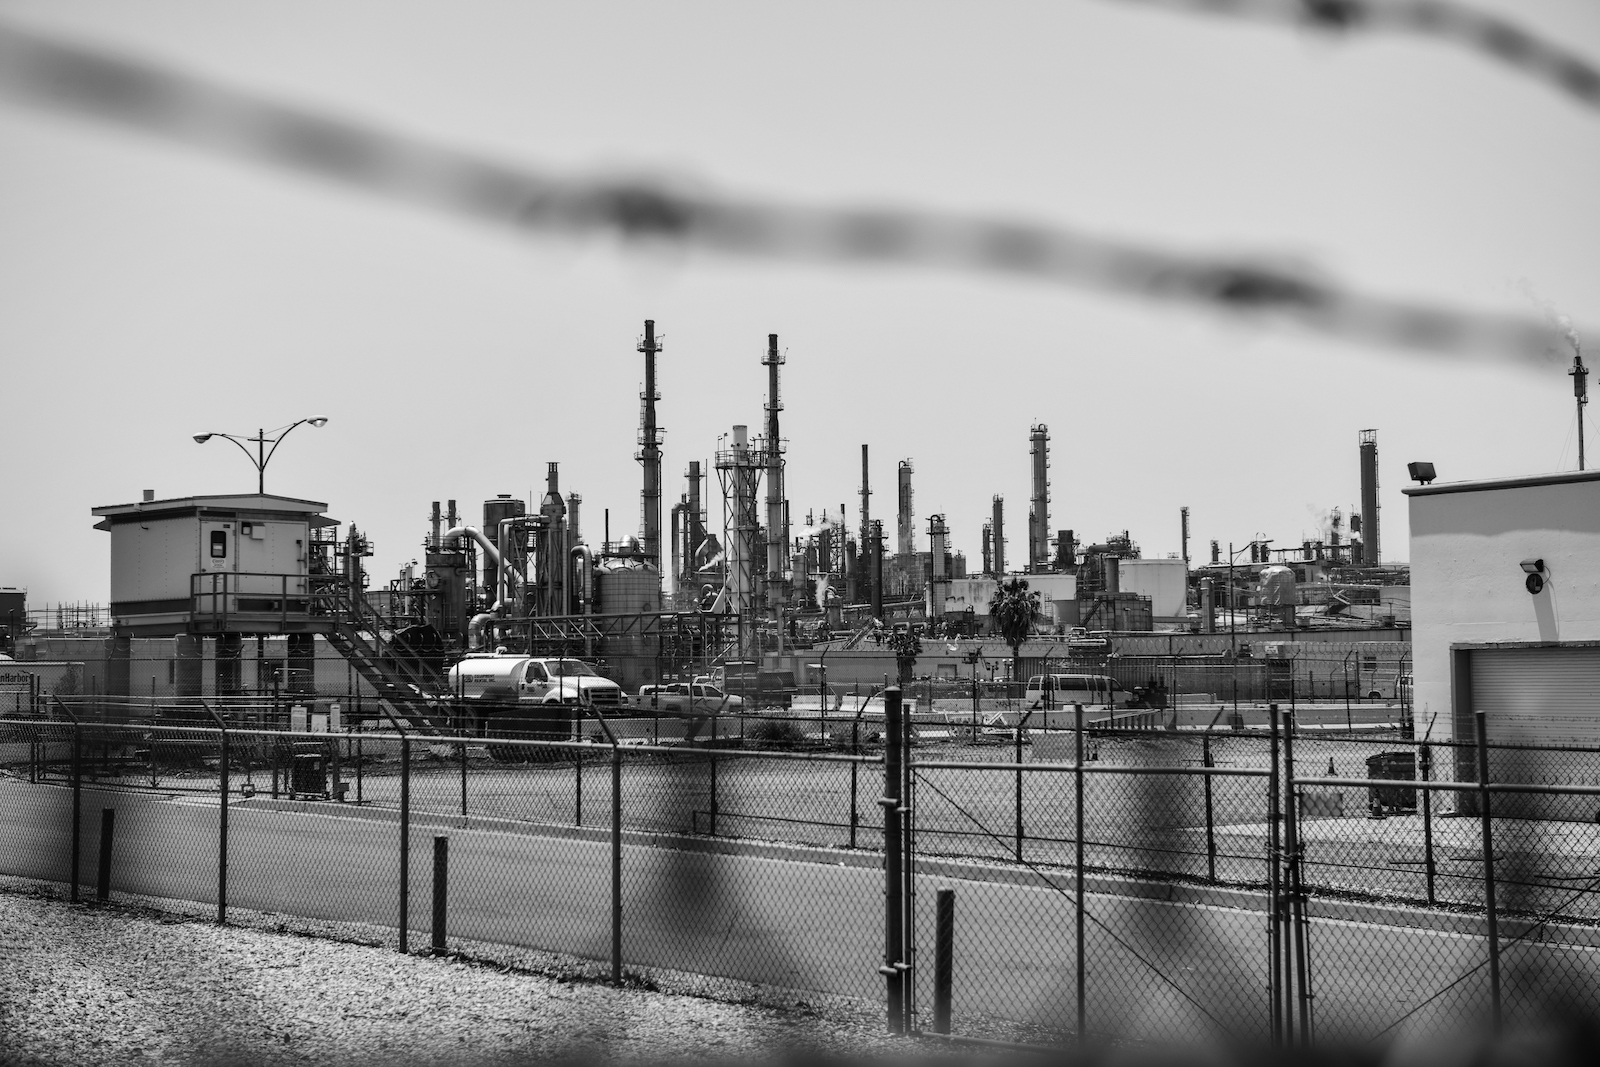 barbed wire surrounds an oil refinery